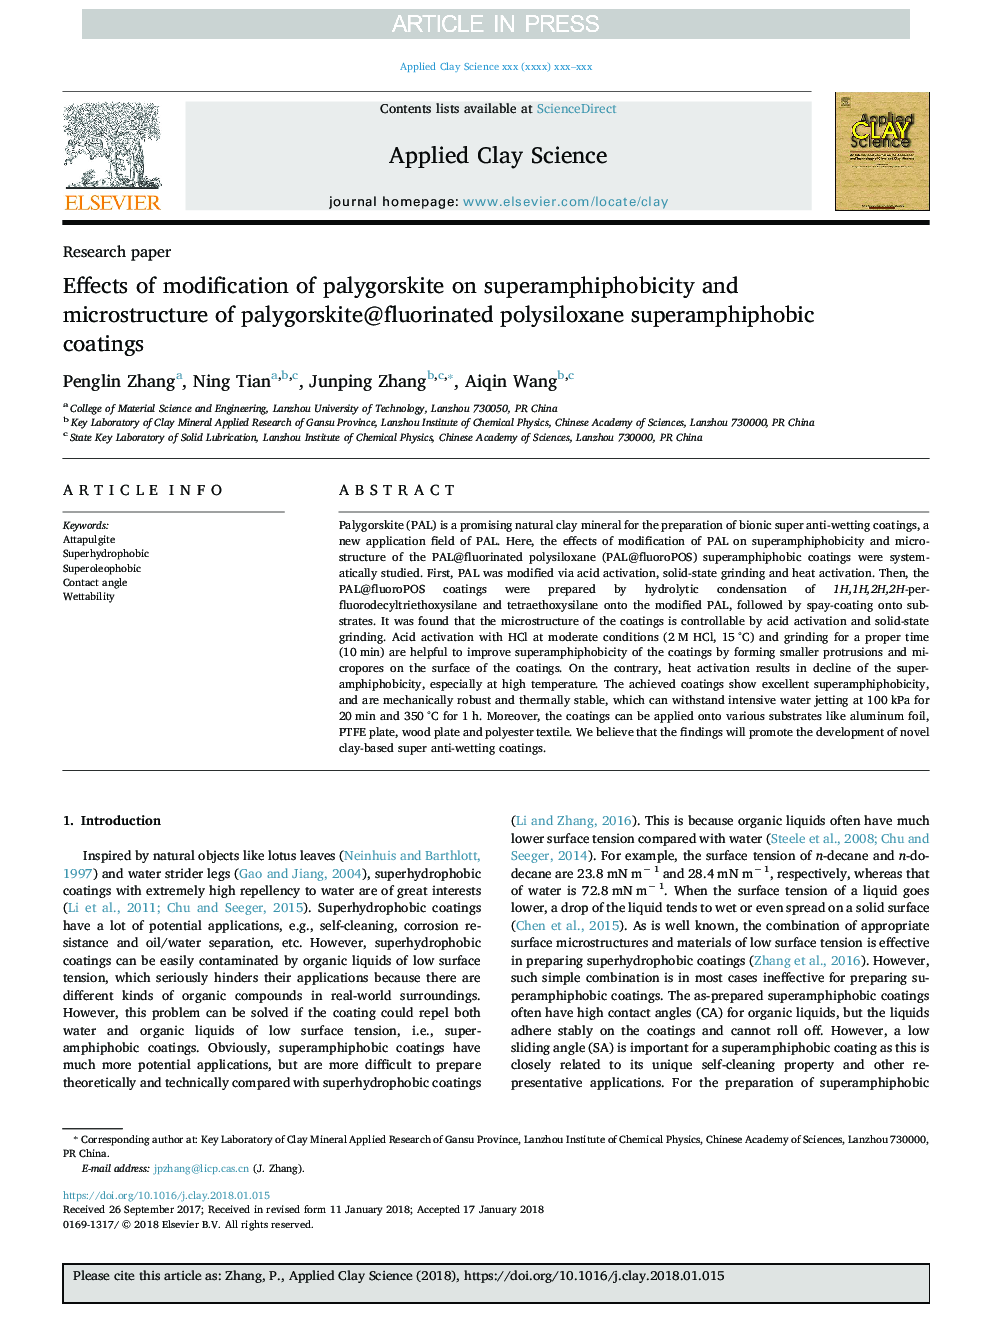 Effects of modification of palygorskite on superamphiphobicity and microstructure of palygorskite@fluorinated polysiloxane superamphiphobic coatings